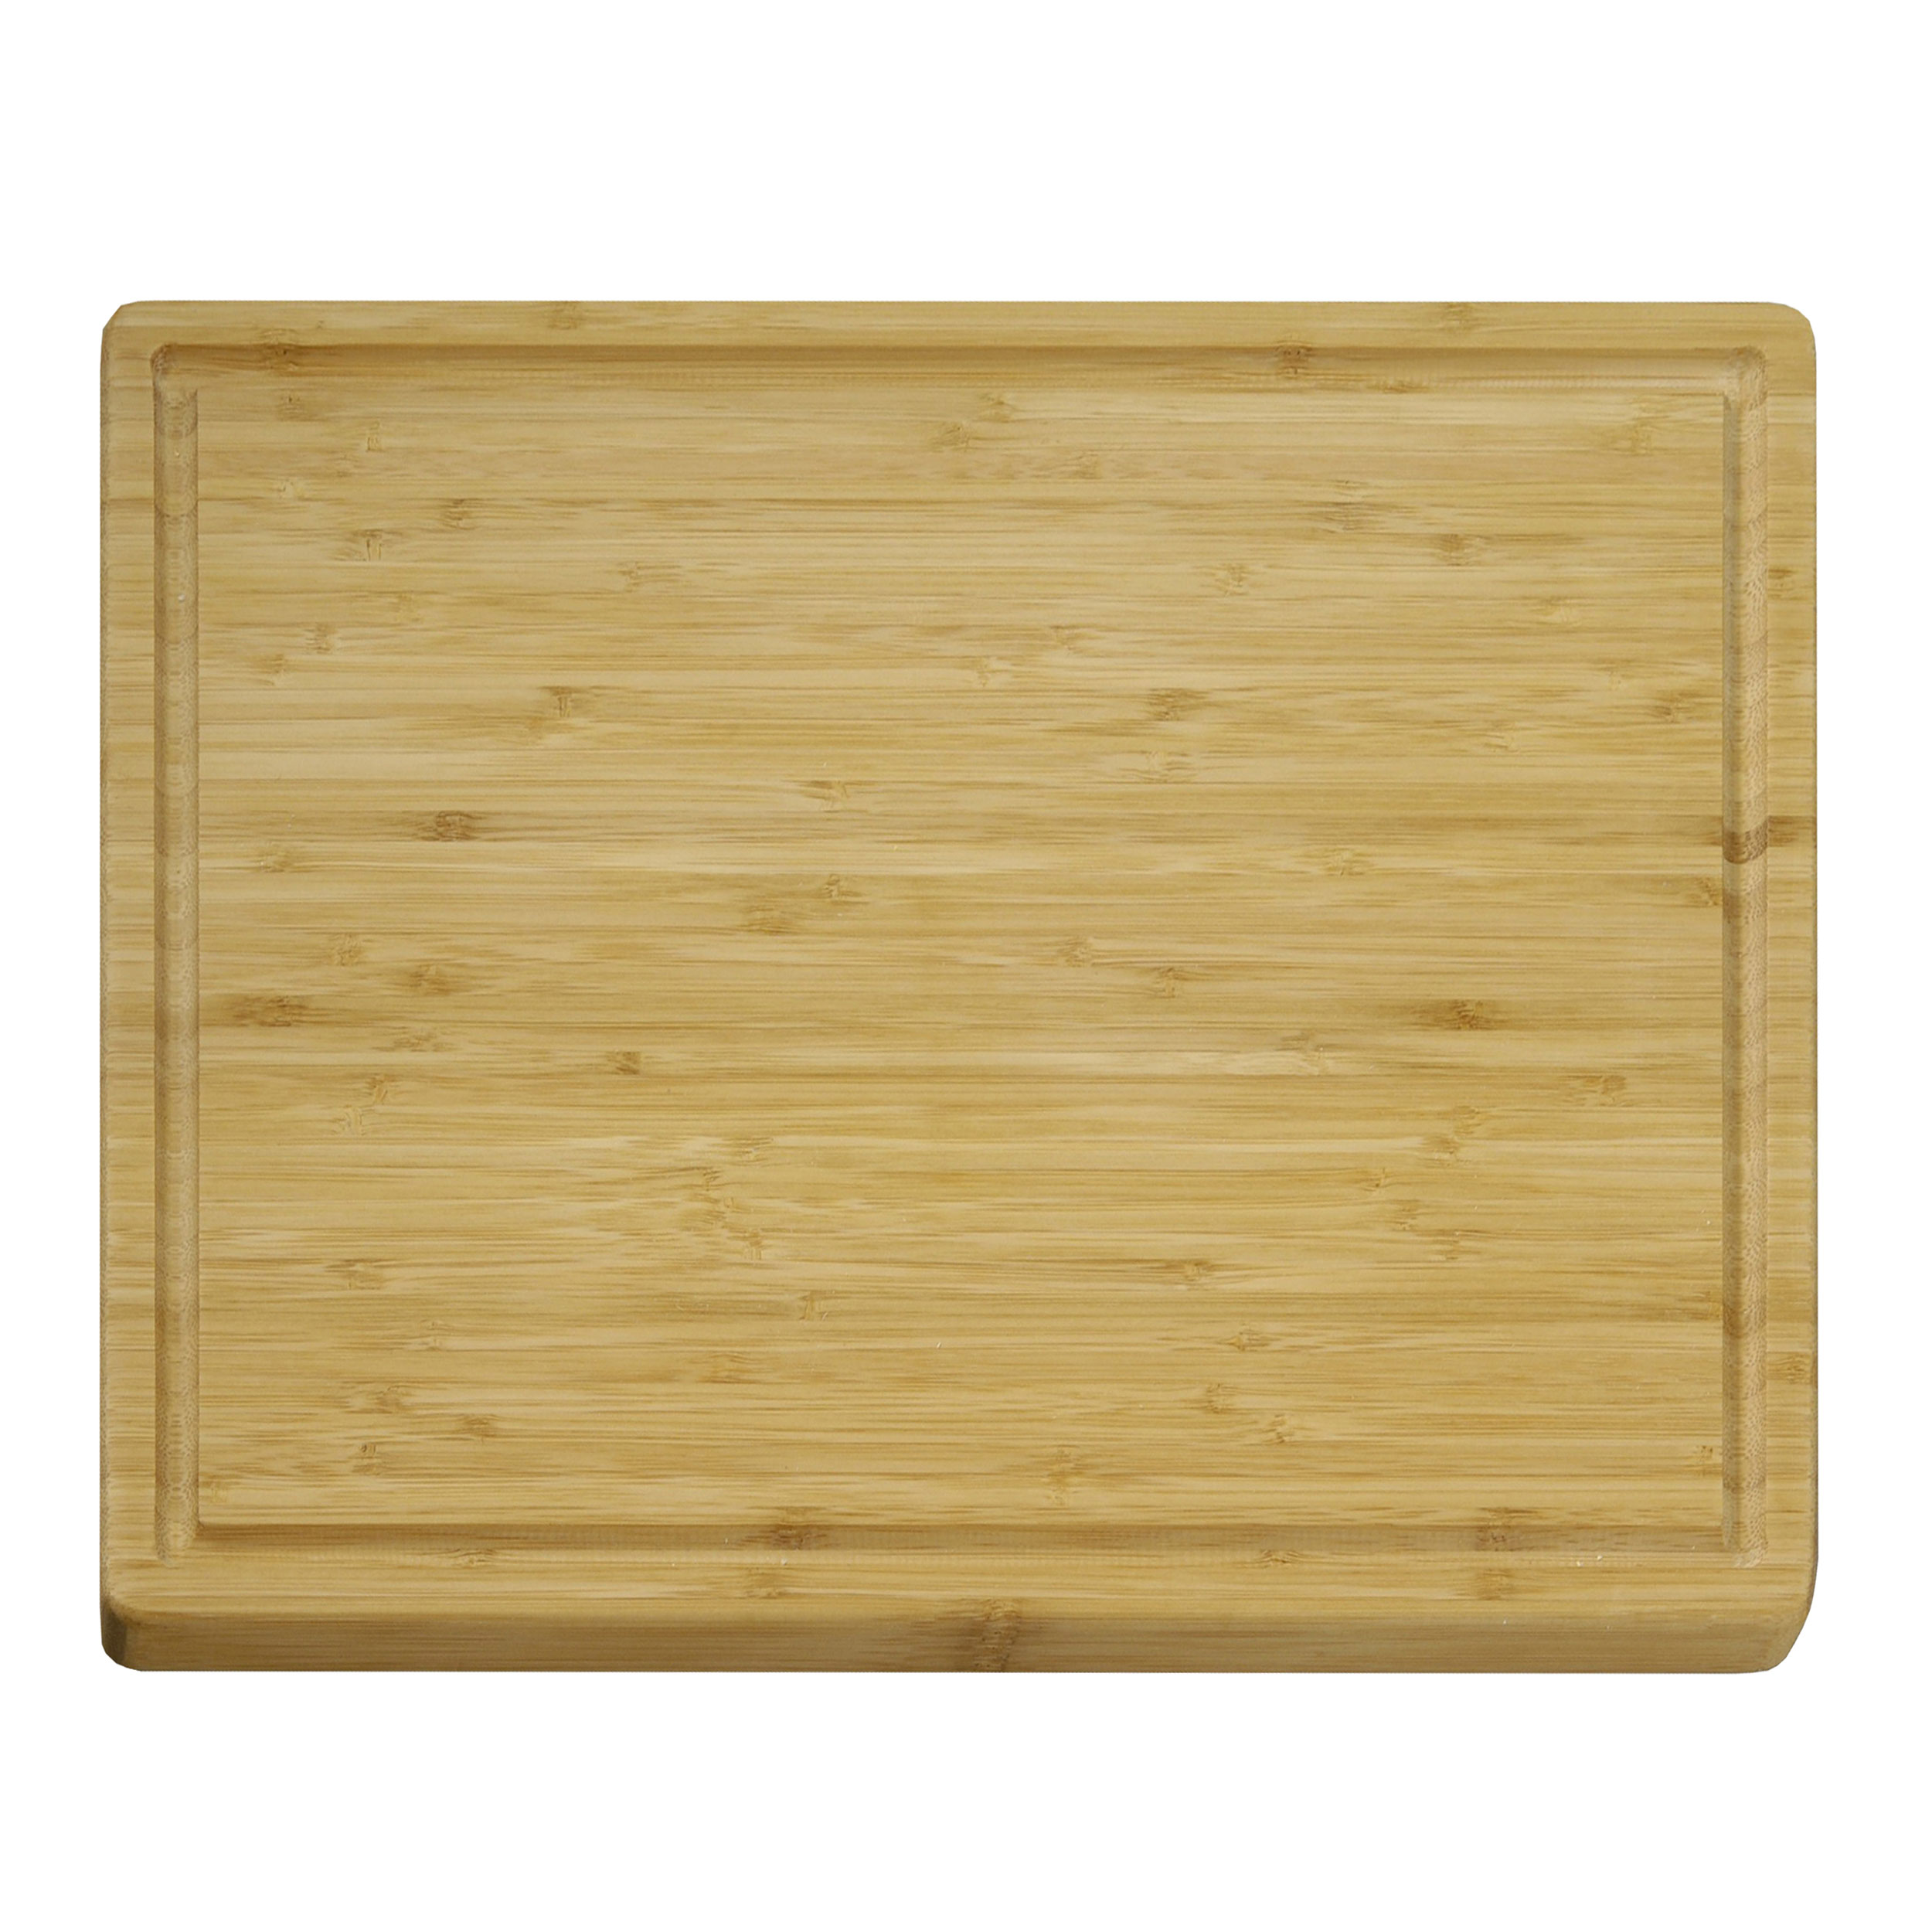 12 X 15 Inch X 3/5 Inch Thick Bamboo Grooved Cutting Board